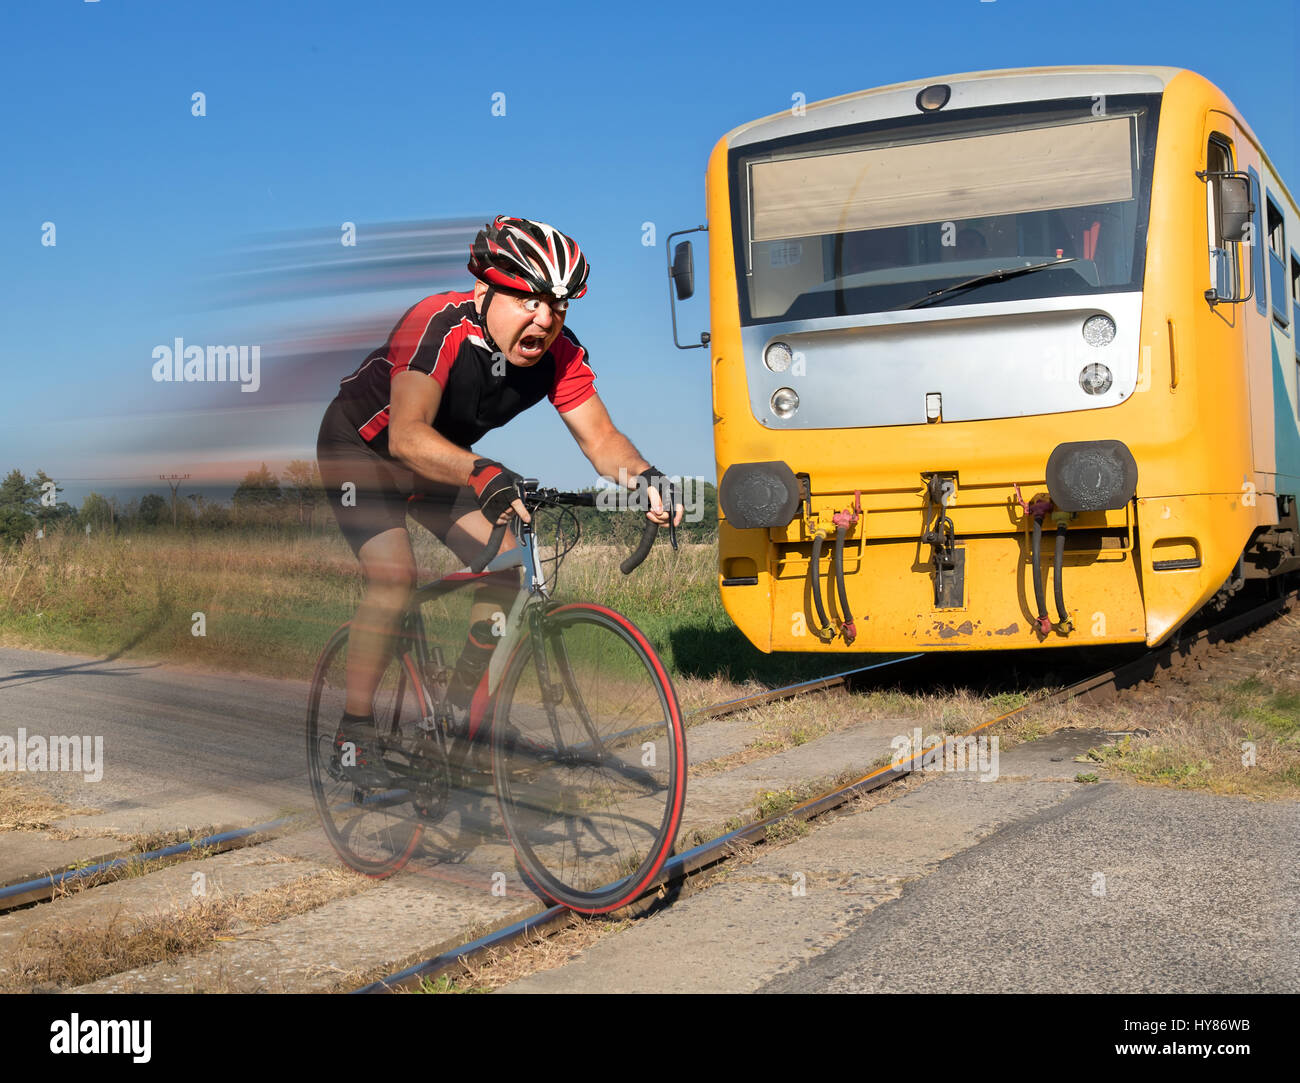 Terrified cyclist is rushing before by train on the tracks. Shocked biker ride a railway crossing in front of an approaching train. Stock Photo